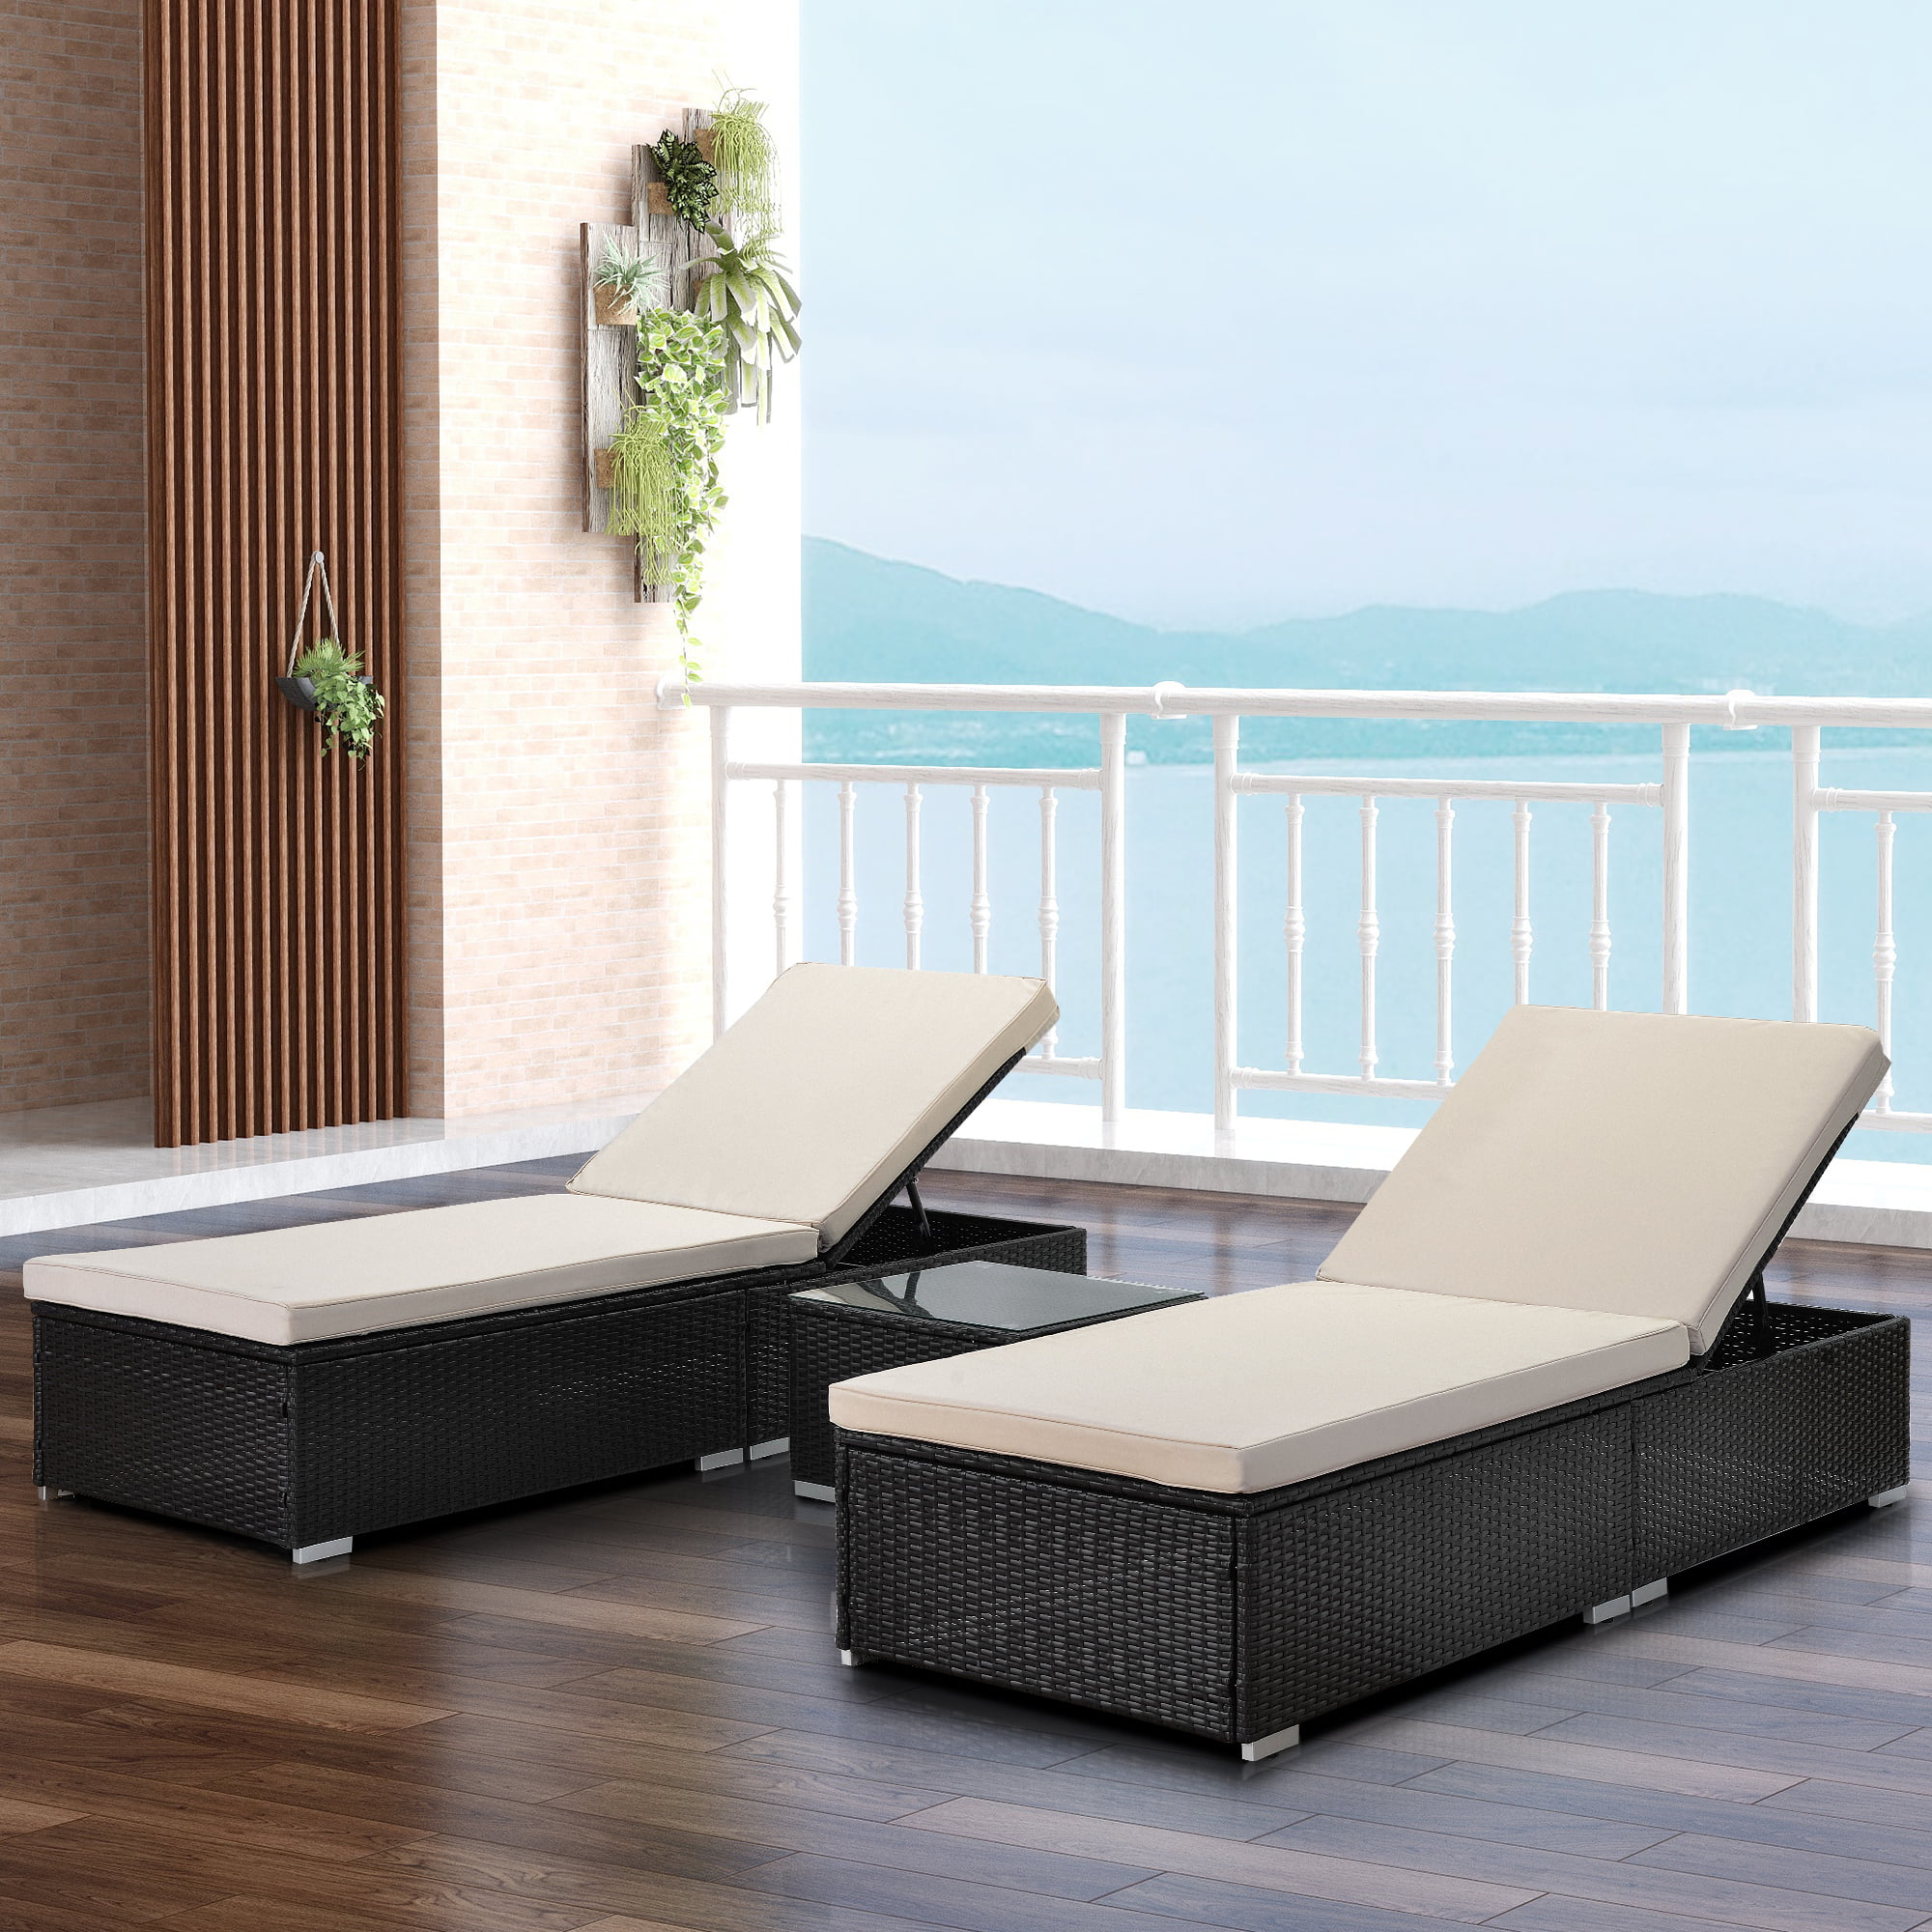 Sportaza Outdoor Garden 3 Piece Patio Lounge Set  Adjustable PE Rattan Reclining Chairs with Cushions and Side Table. - image 2 of 8